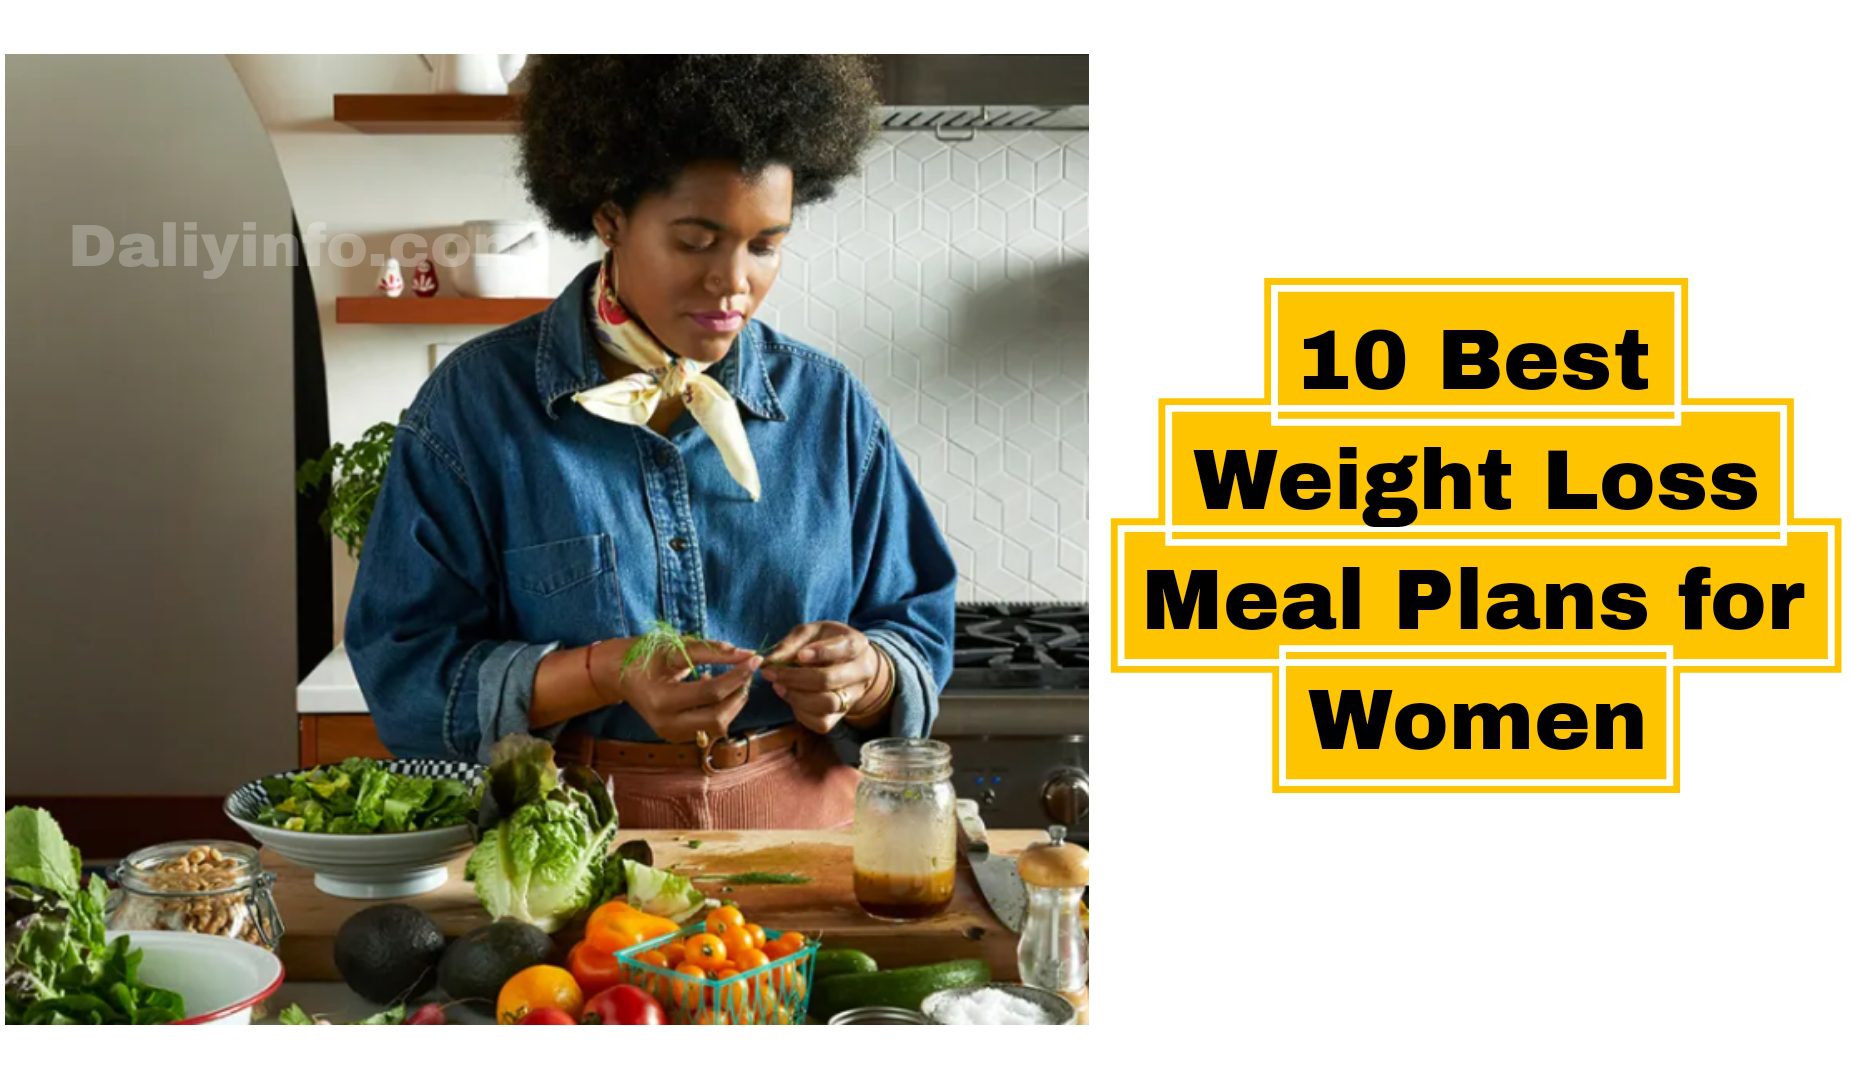 10 Best Weight Loss Meal Plans for Women